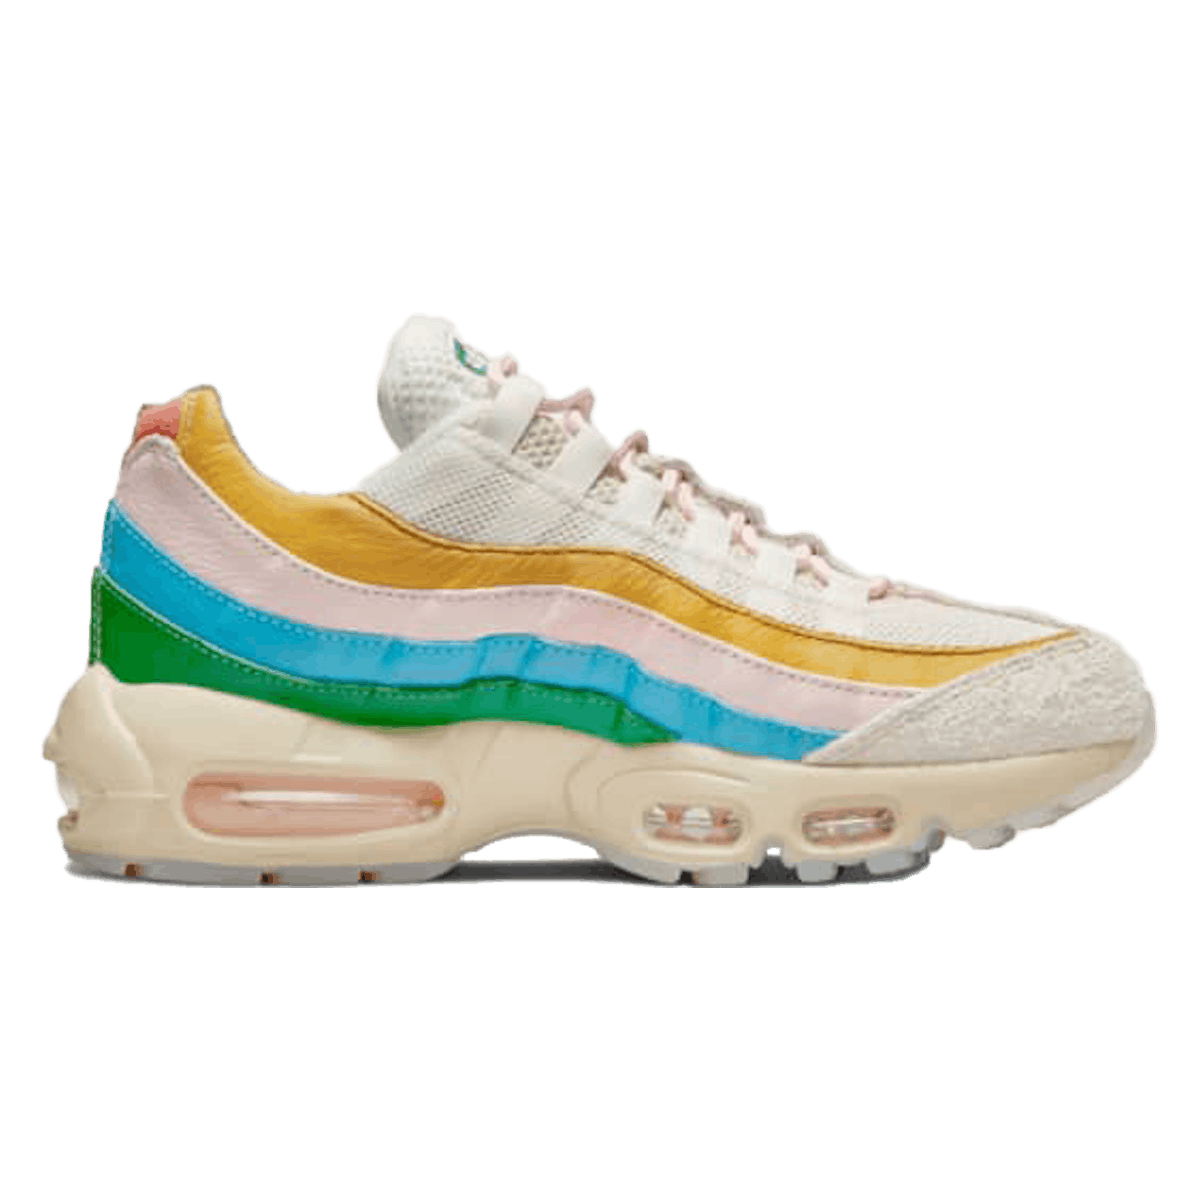 Nike Air Max 95 WMNS "Rise and Unity"